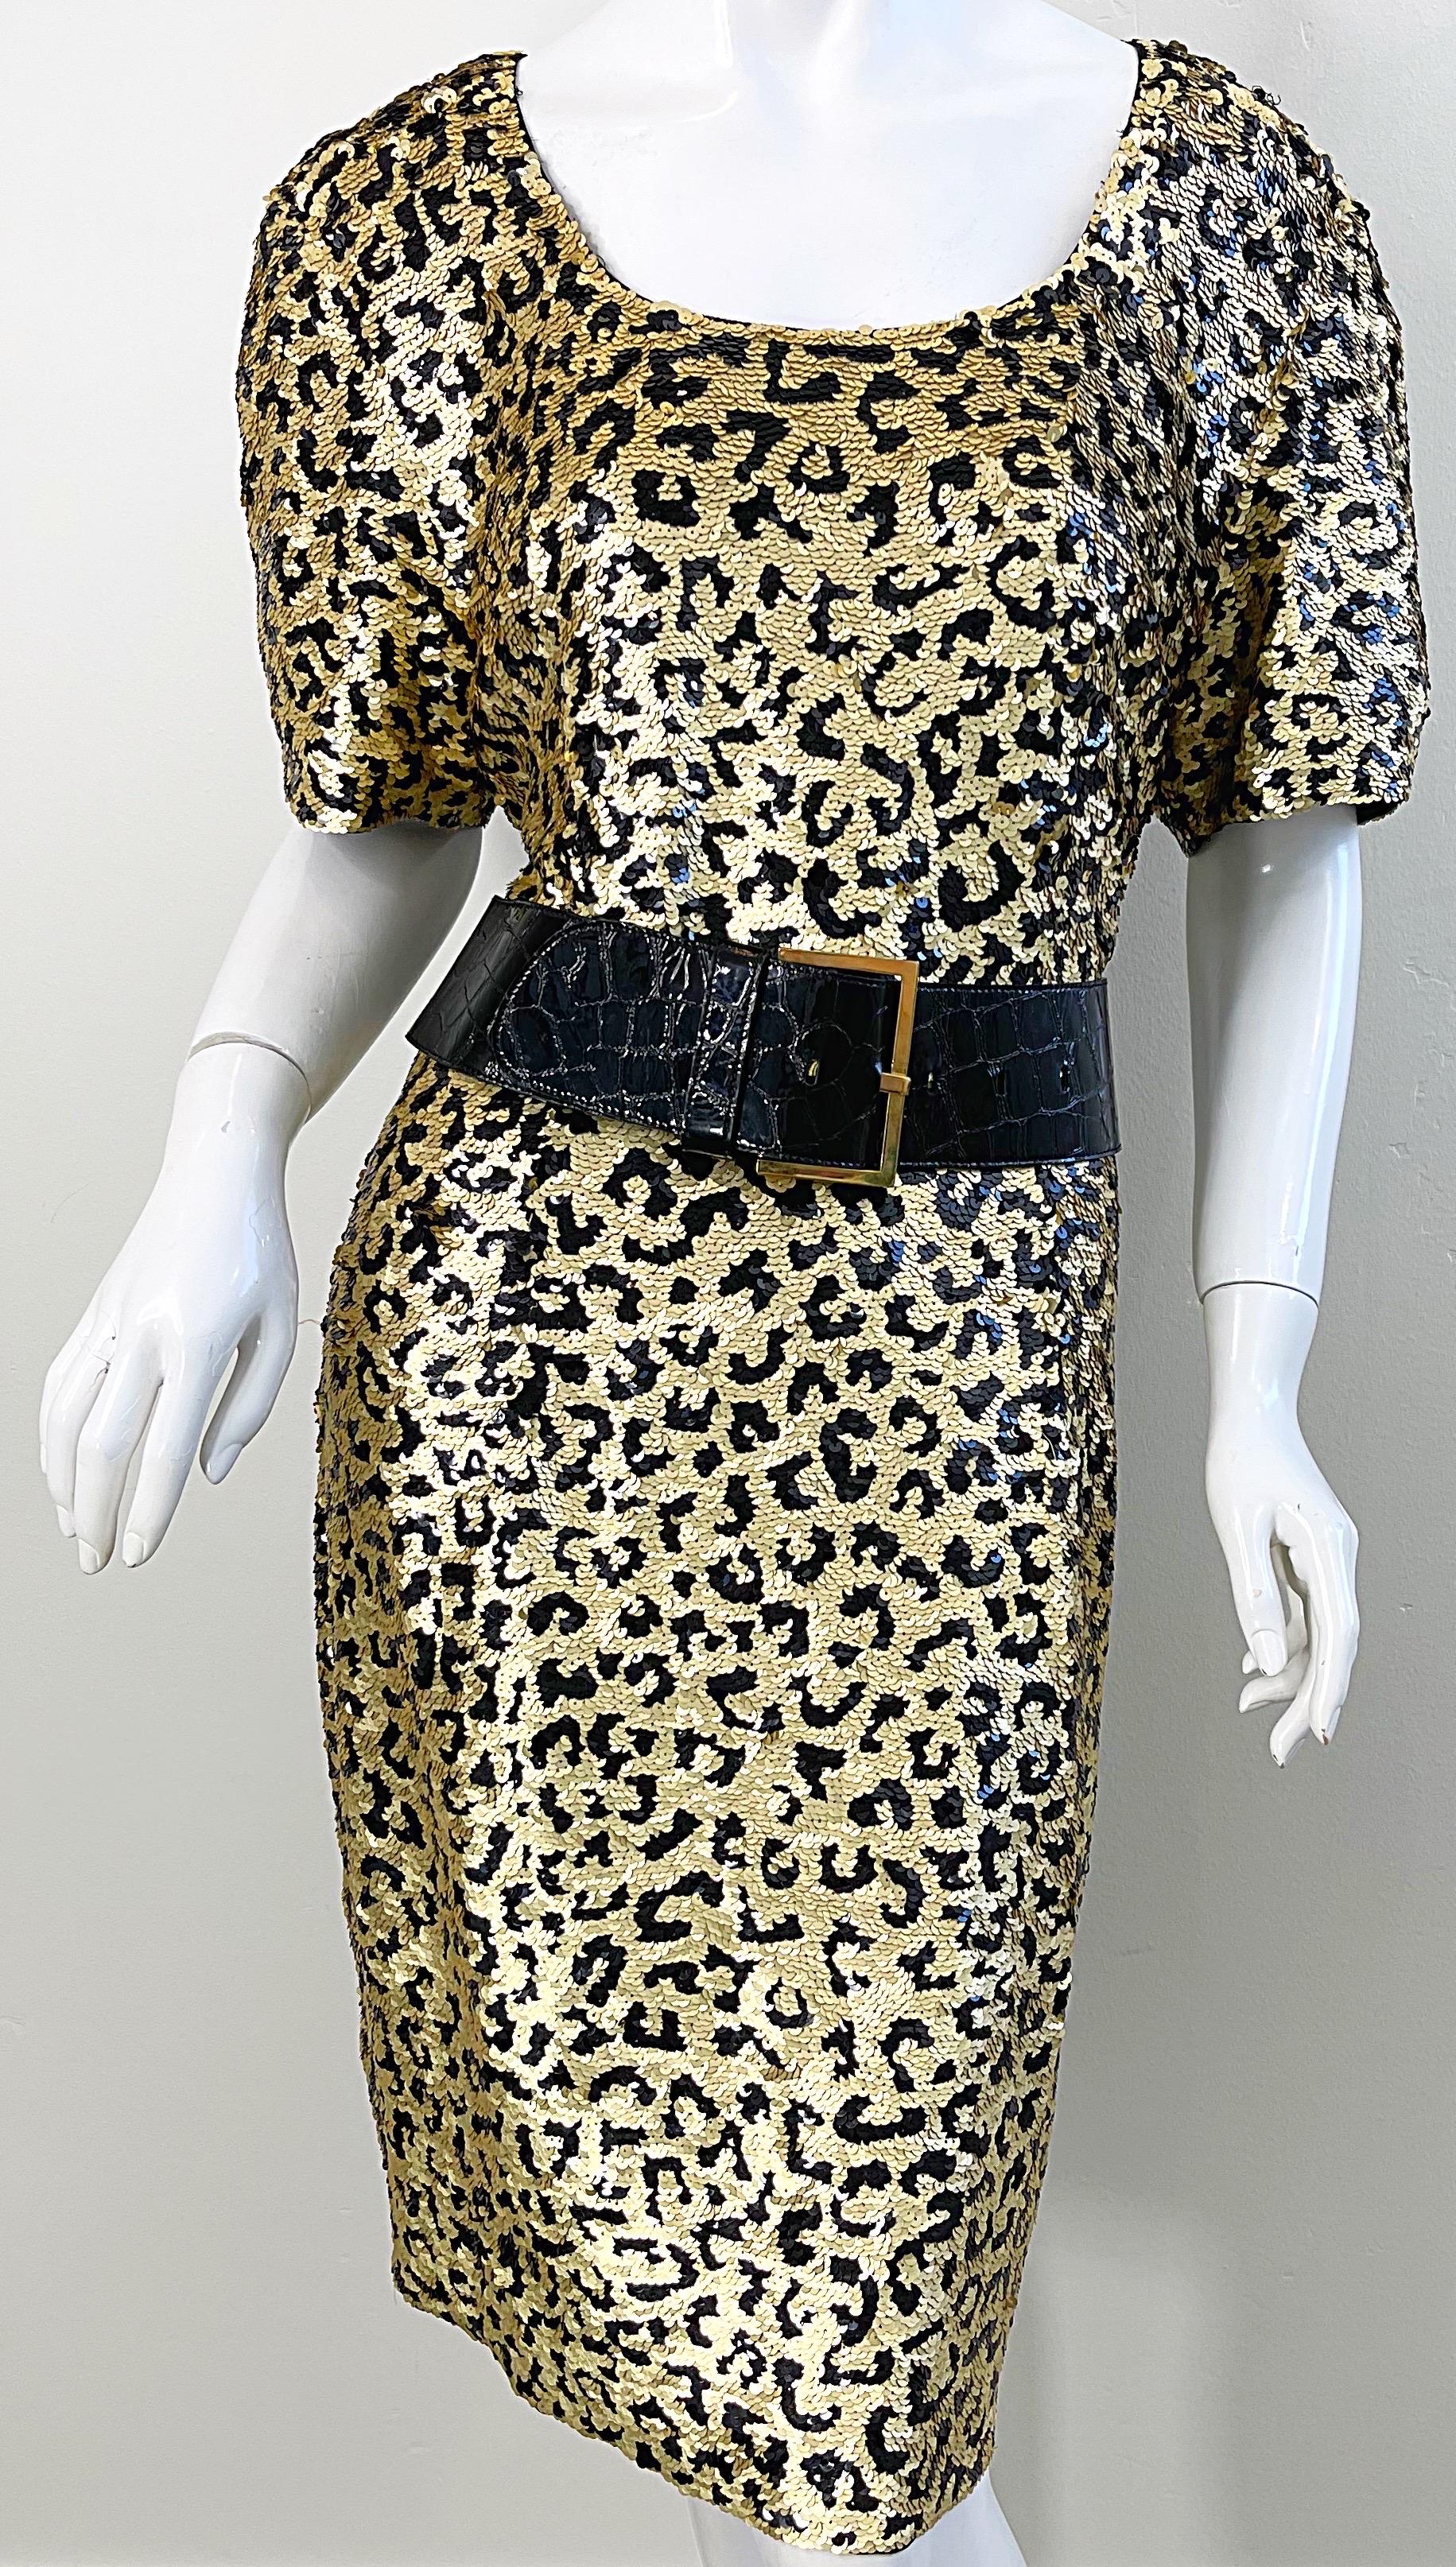 80's leopard print outfit